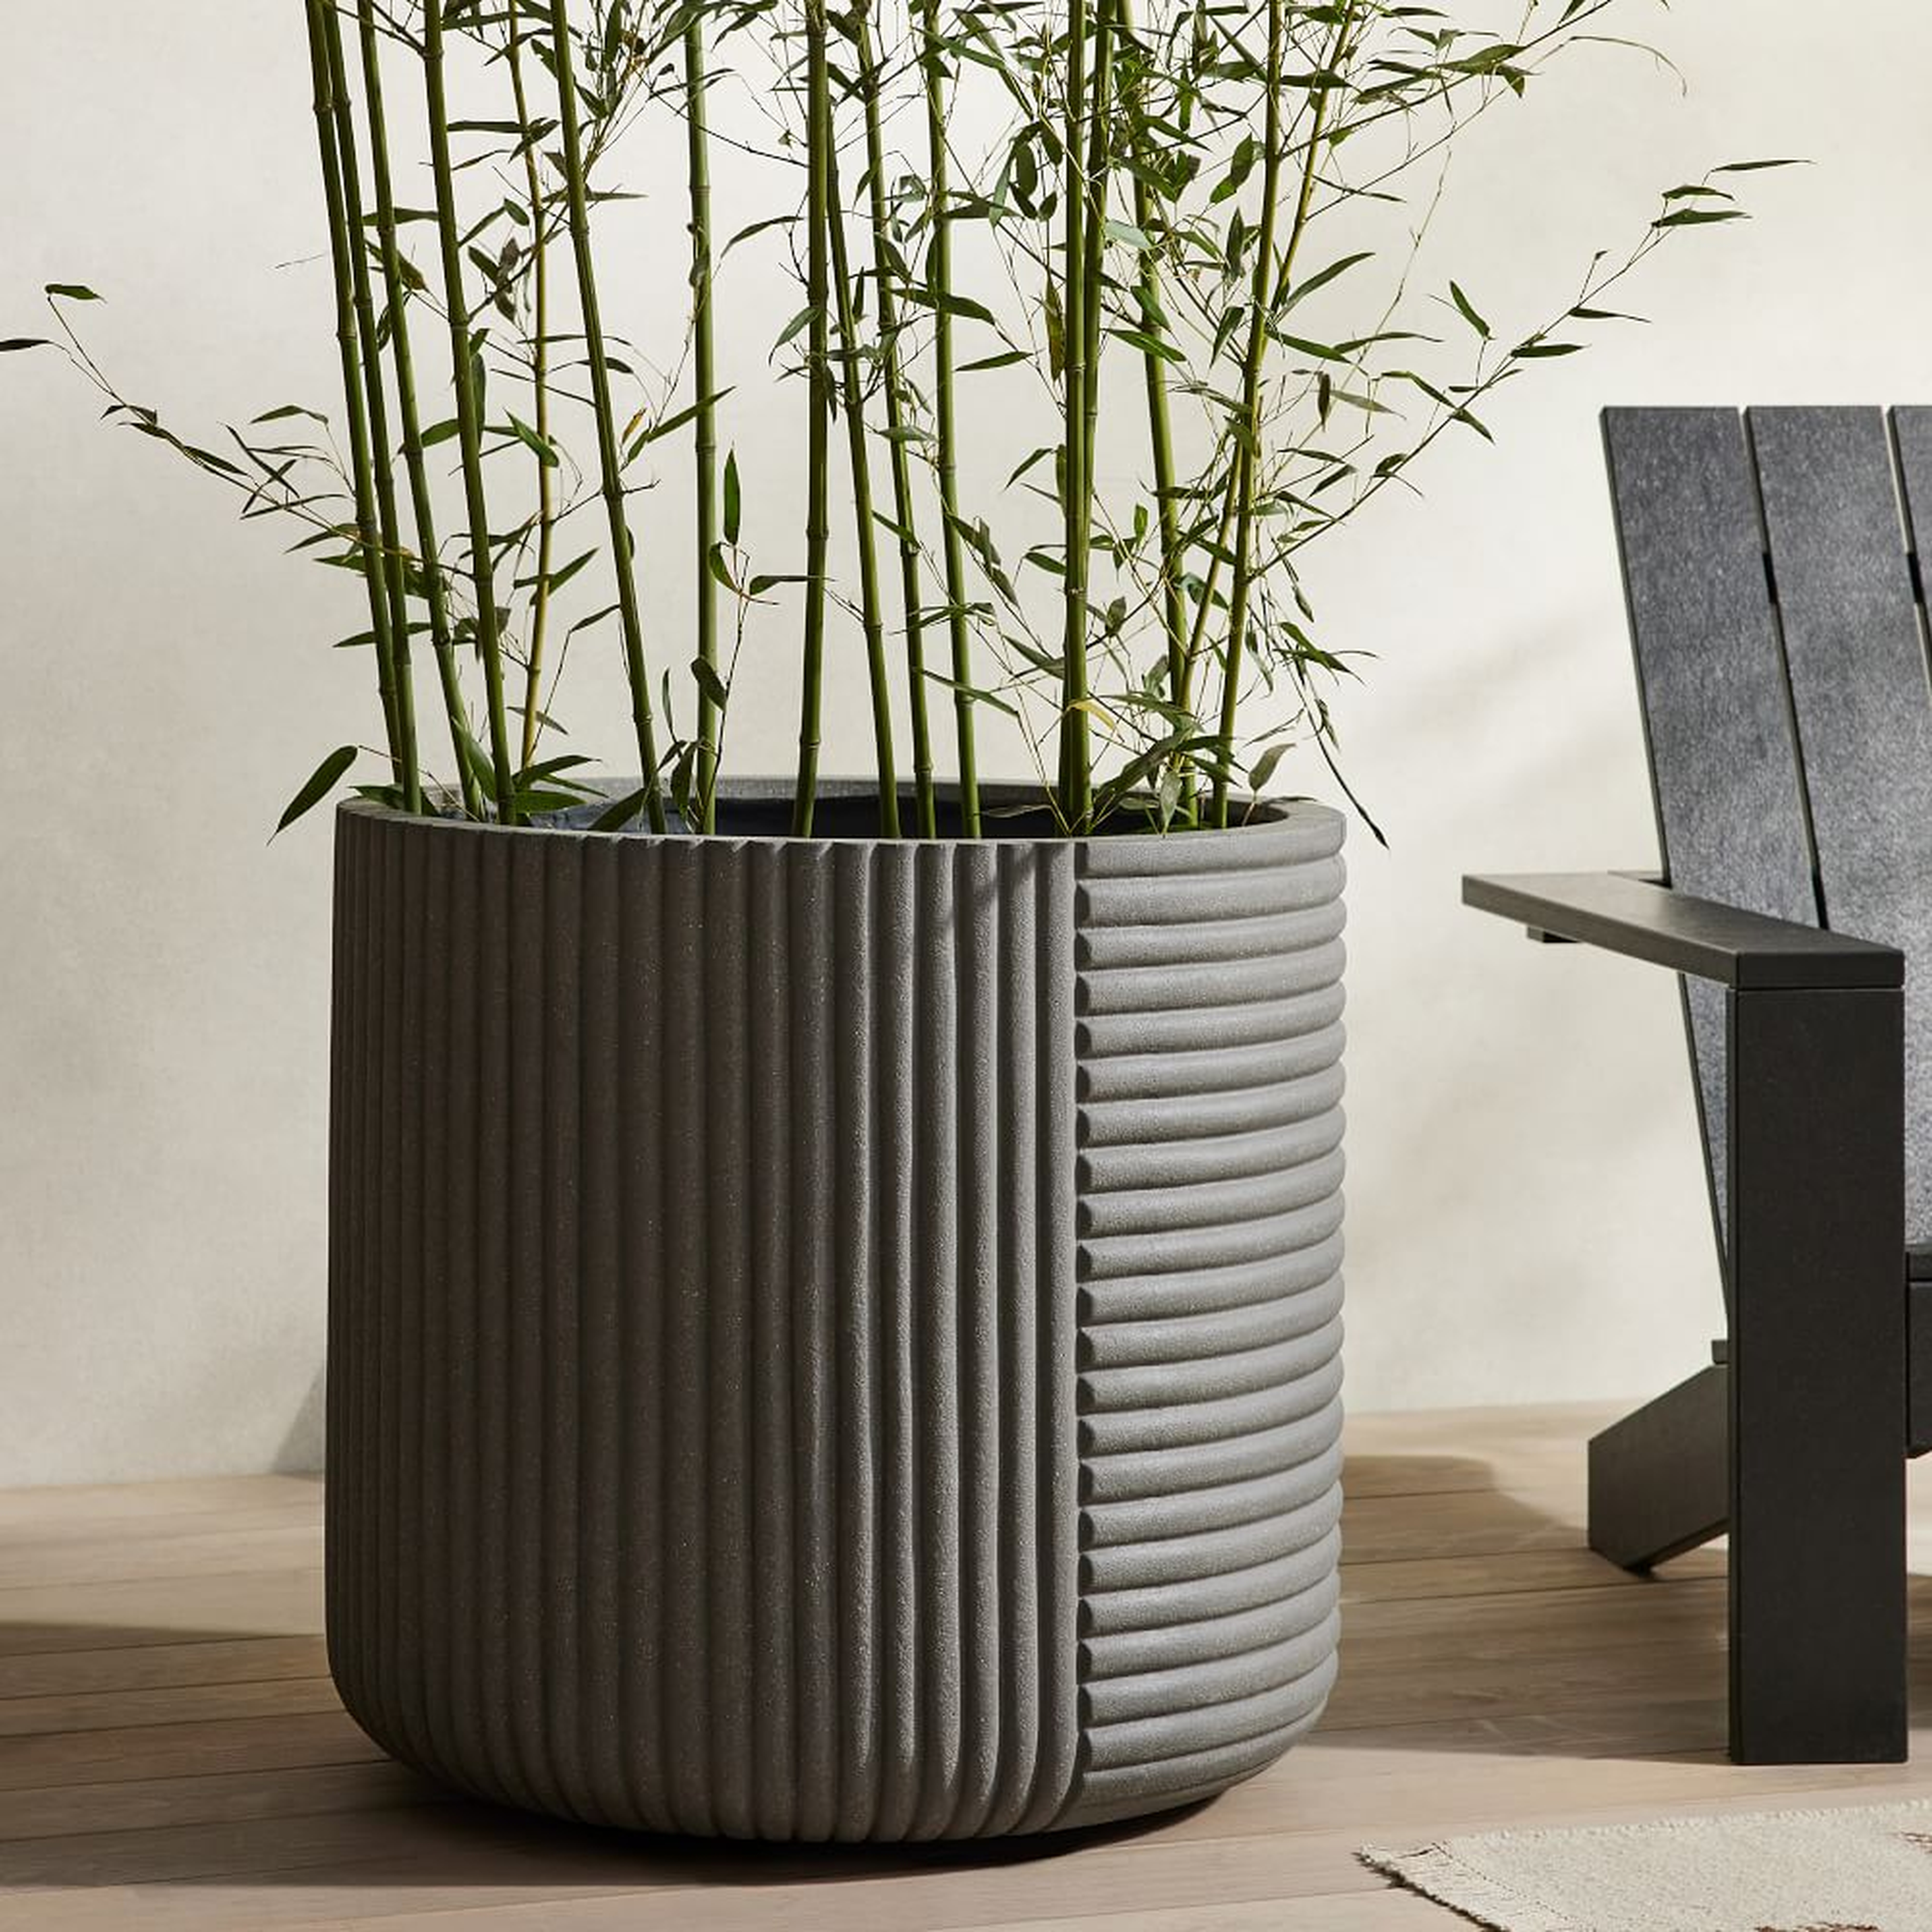 Cecilia Ficonstone Indoor/Outdoor Planter, Extra Large, 27.1"D x 26"H, Frost Gray - West Elm